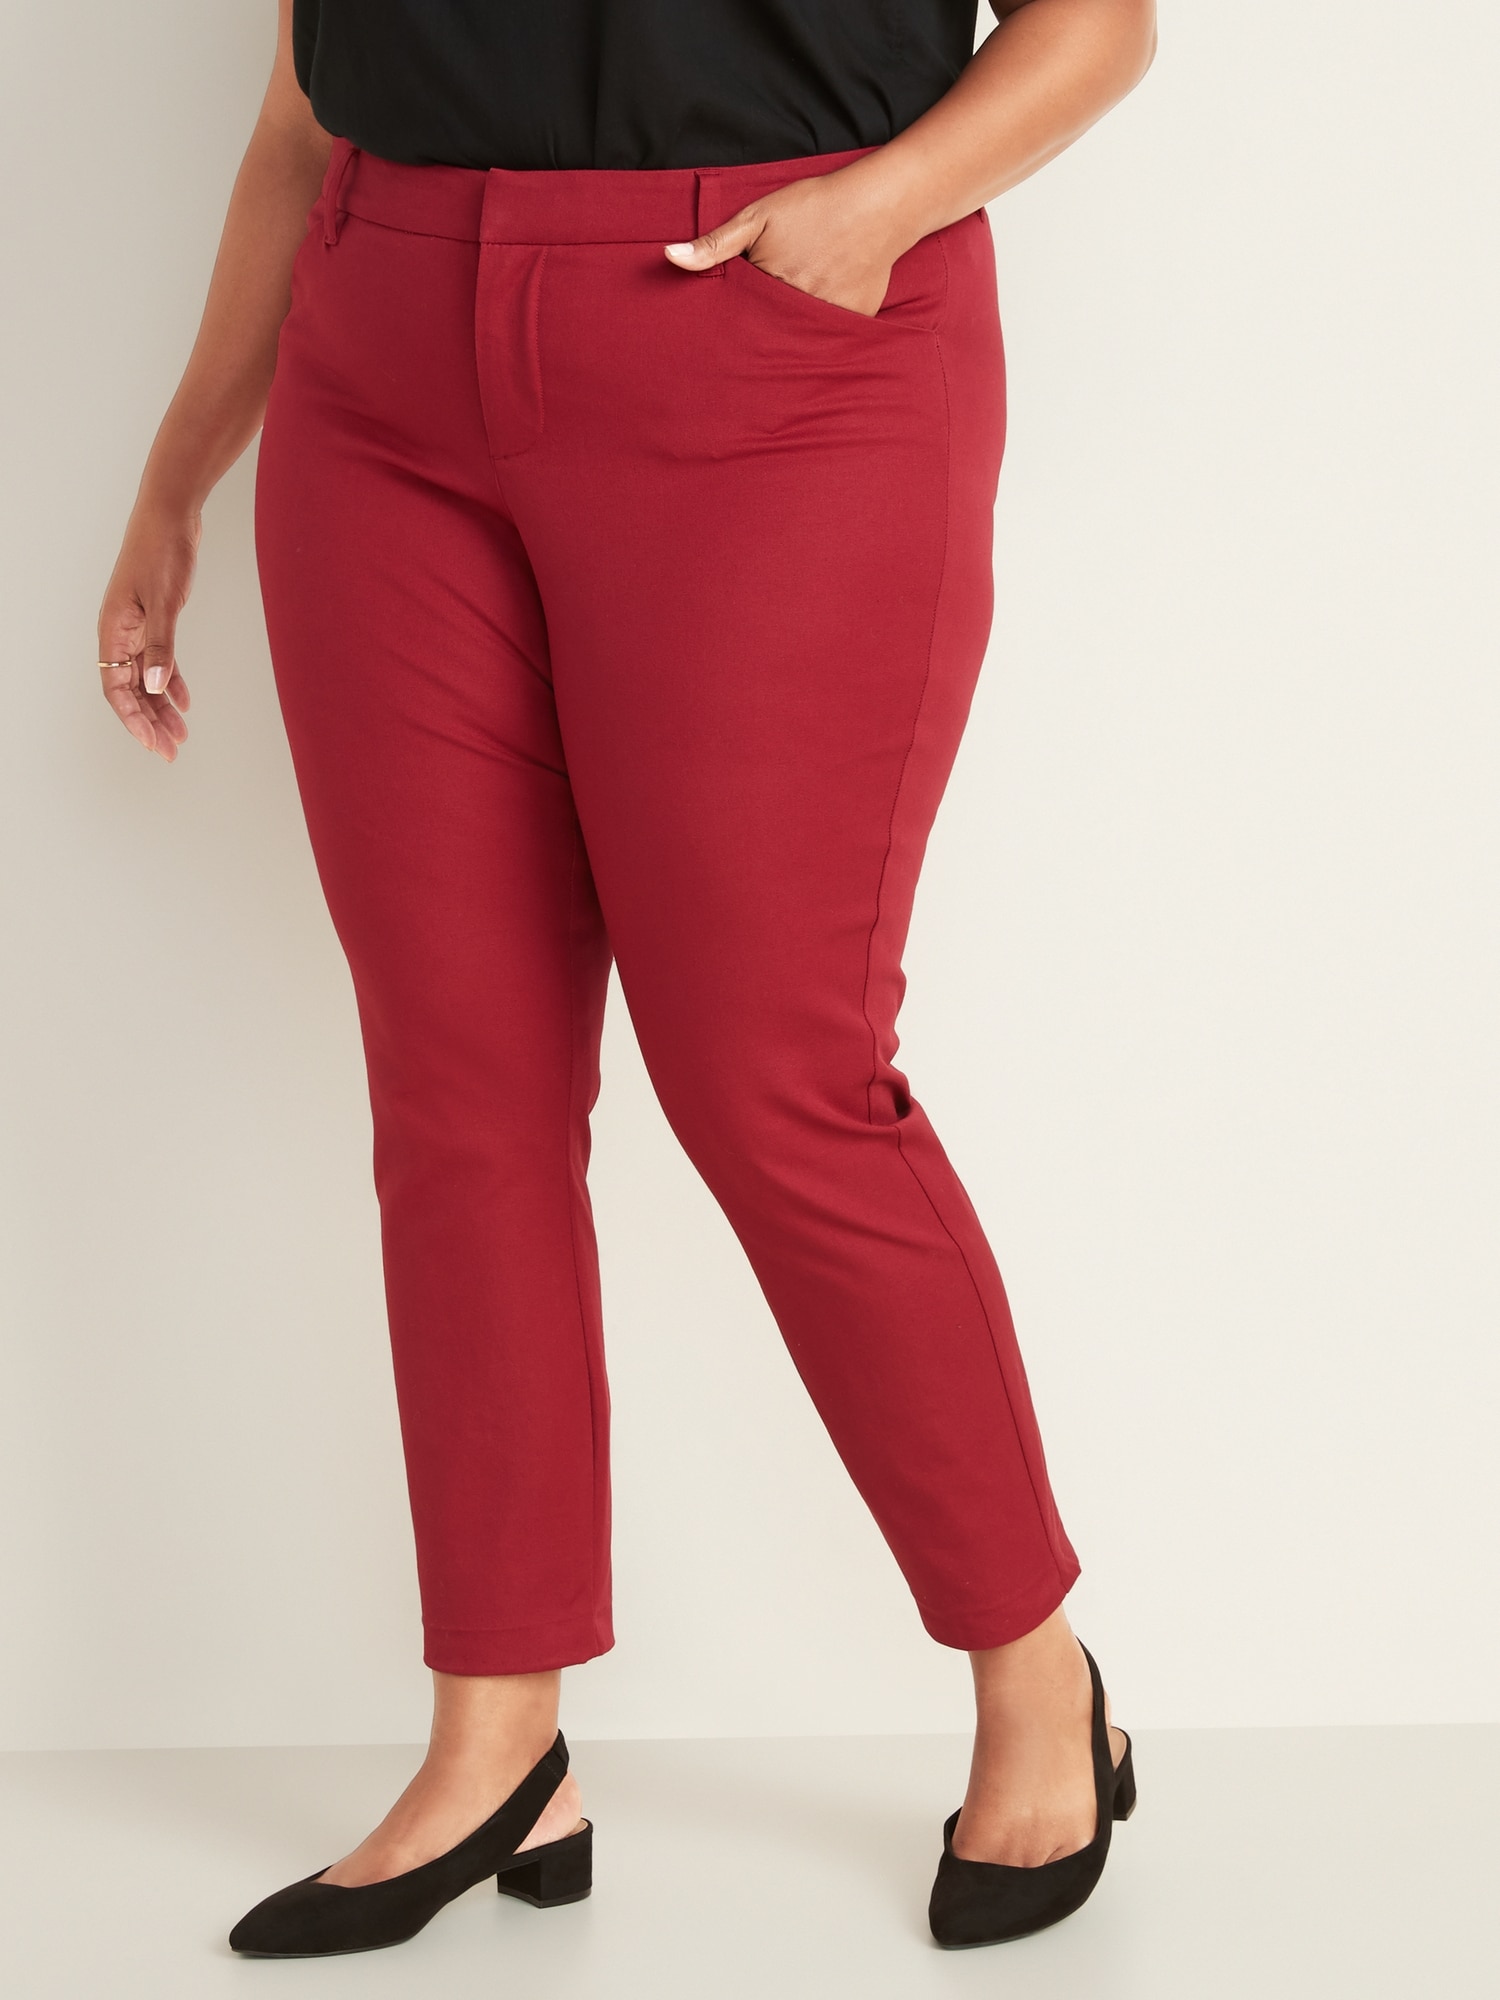 Old Navy Mid Rise Pixie Ankle Pants For, $34, Old Navy